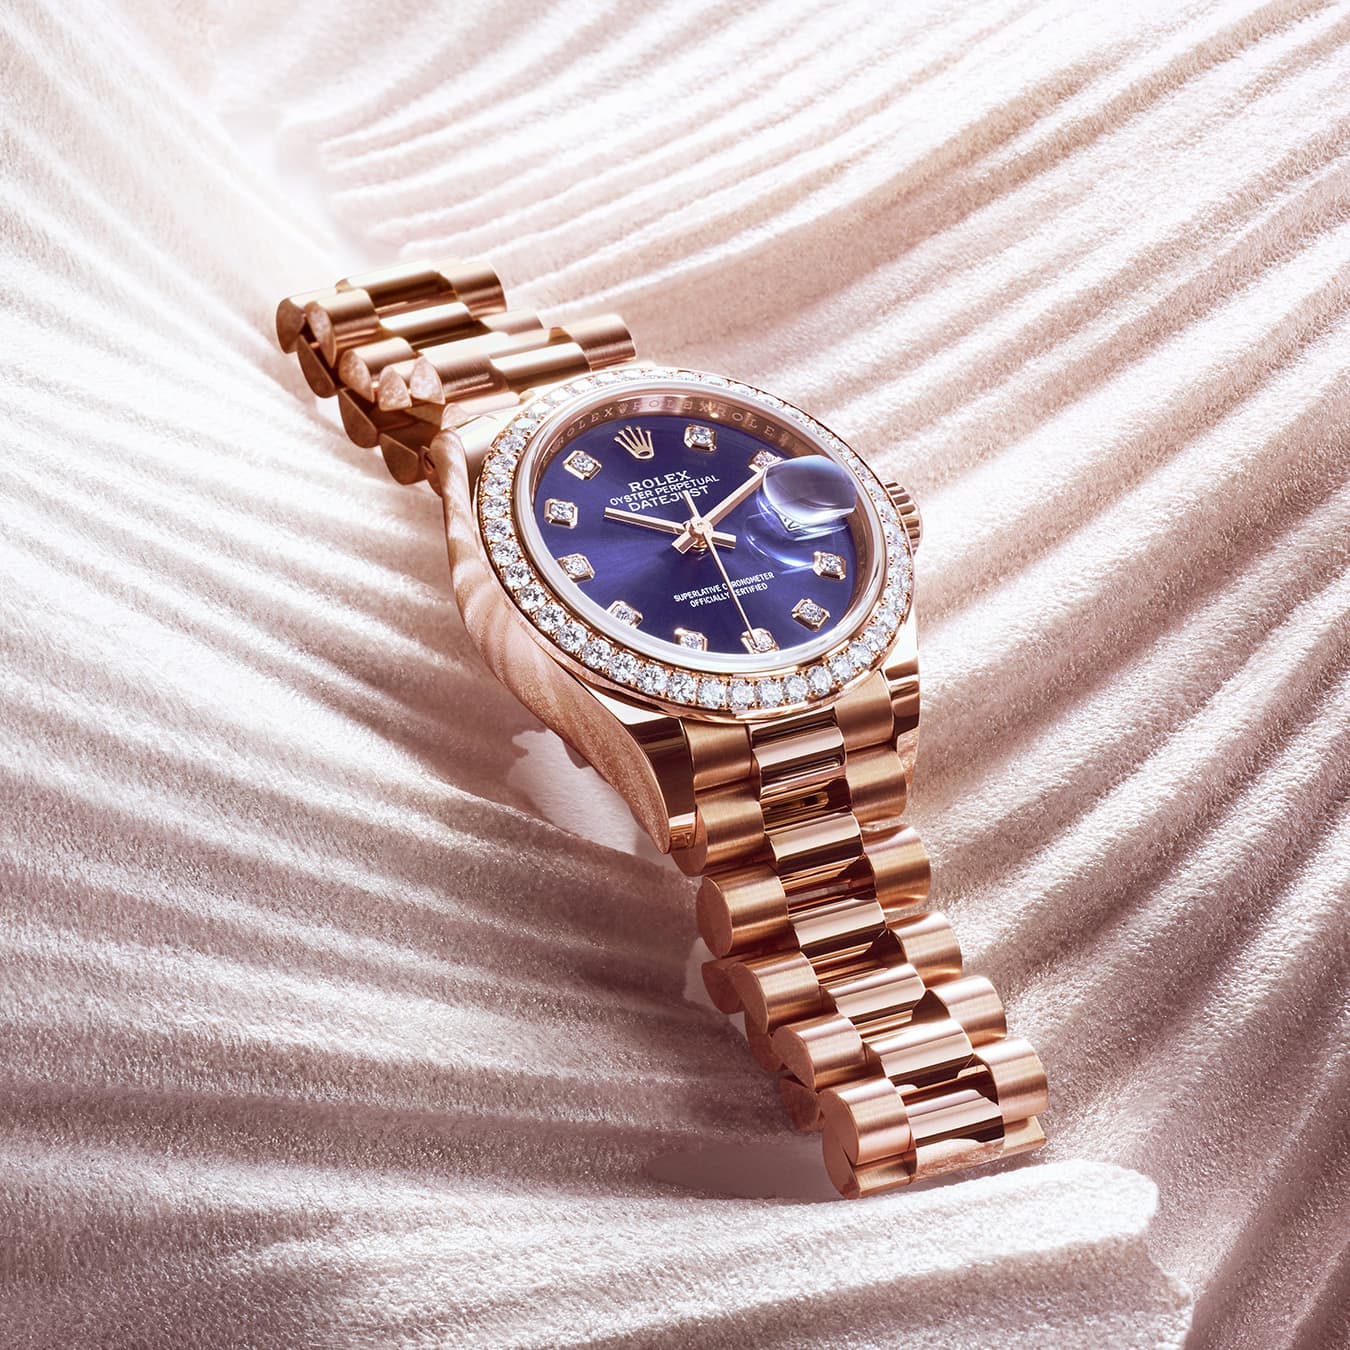 Rose gold Rolex Lady Datejust watch with navy dial